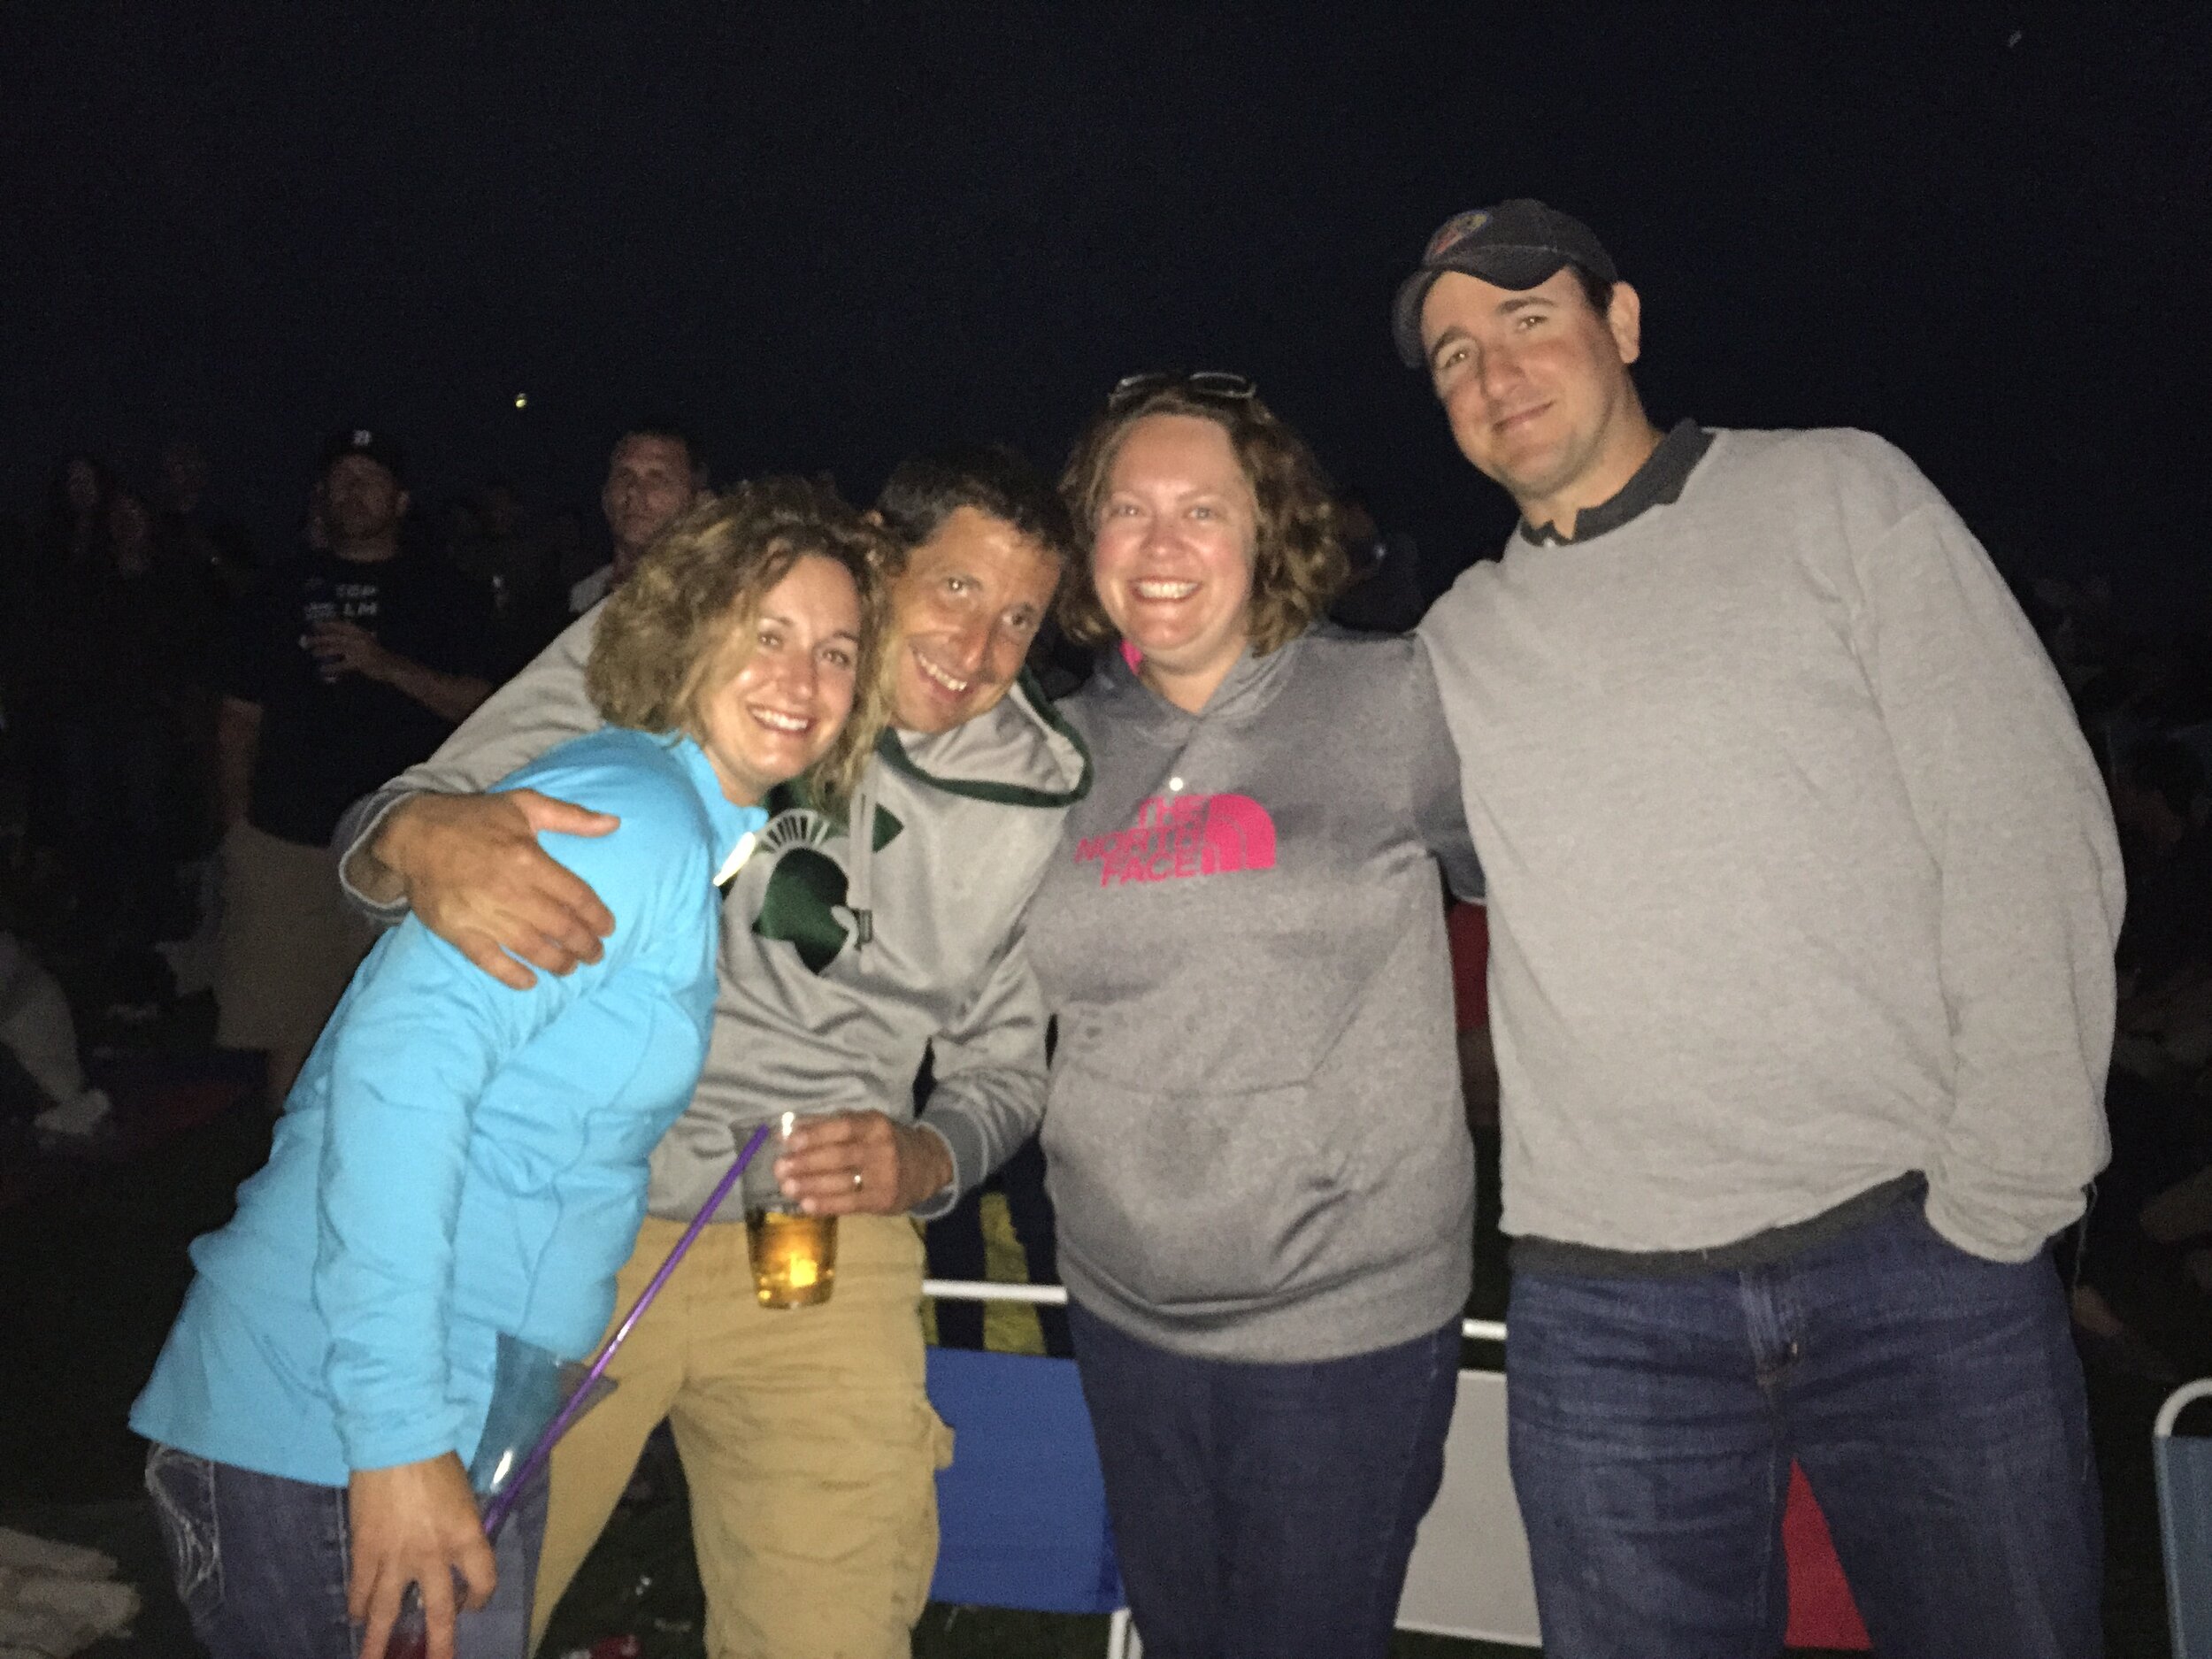 Teresa, Chris, Nikki and Matt on the lawn at DTE Energy Music Theater for the Dave Matthews Band concert